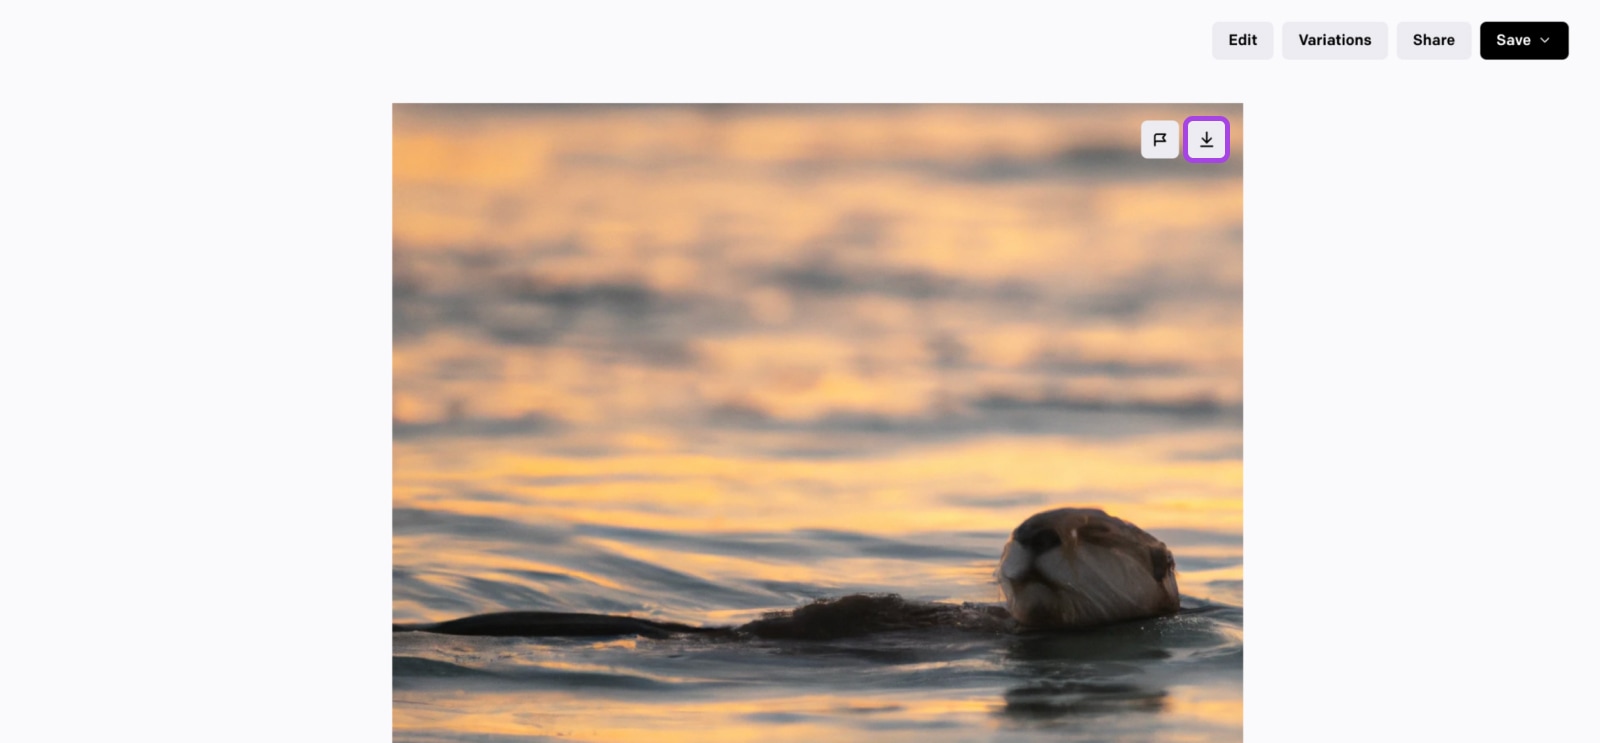 one of the otter pictures on the full screen with a download icon in the upper righthand corner of the photo